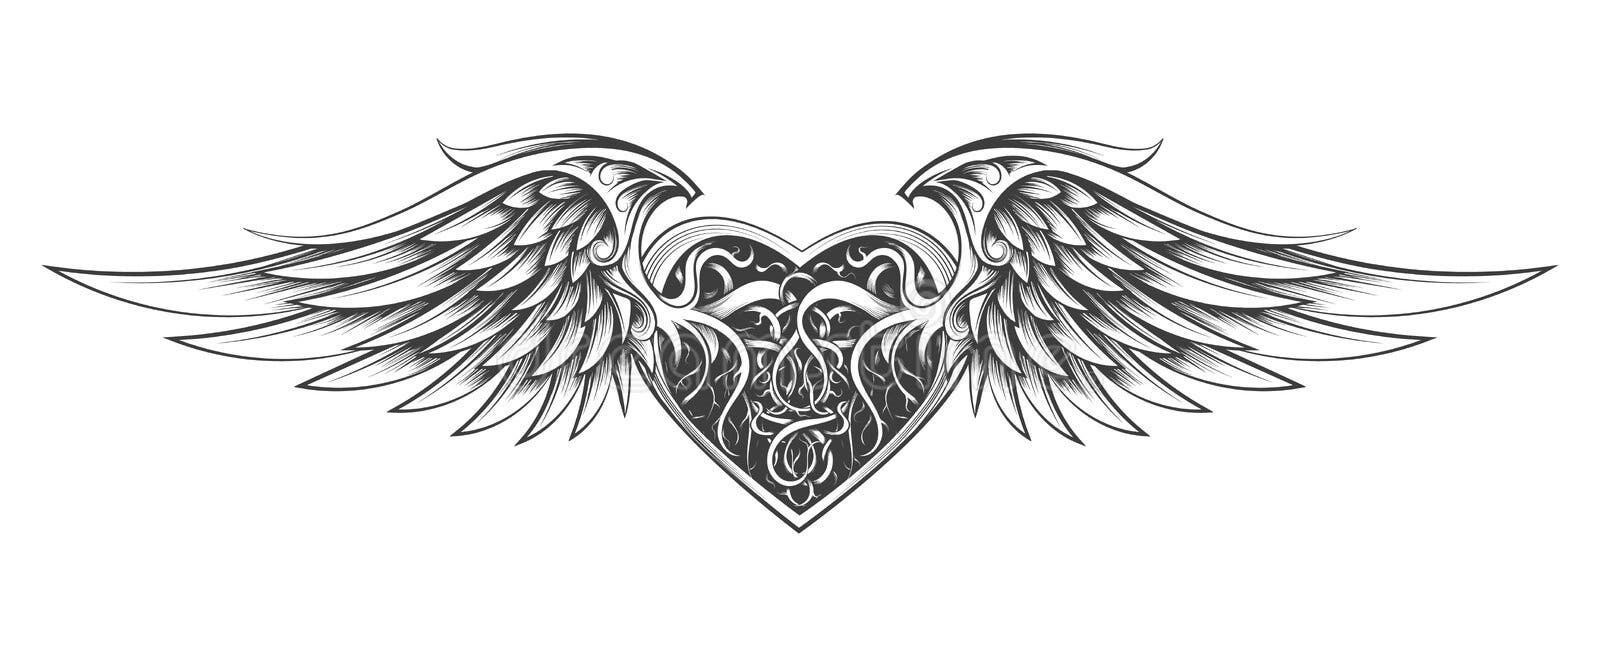 Winged Sacred Heart Tattoo in Engraving Style